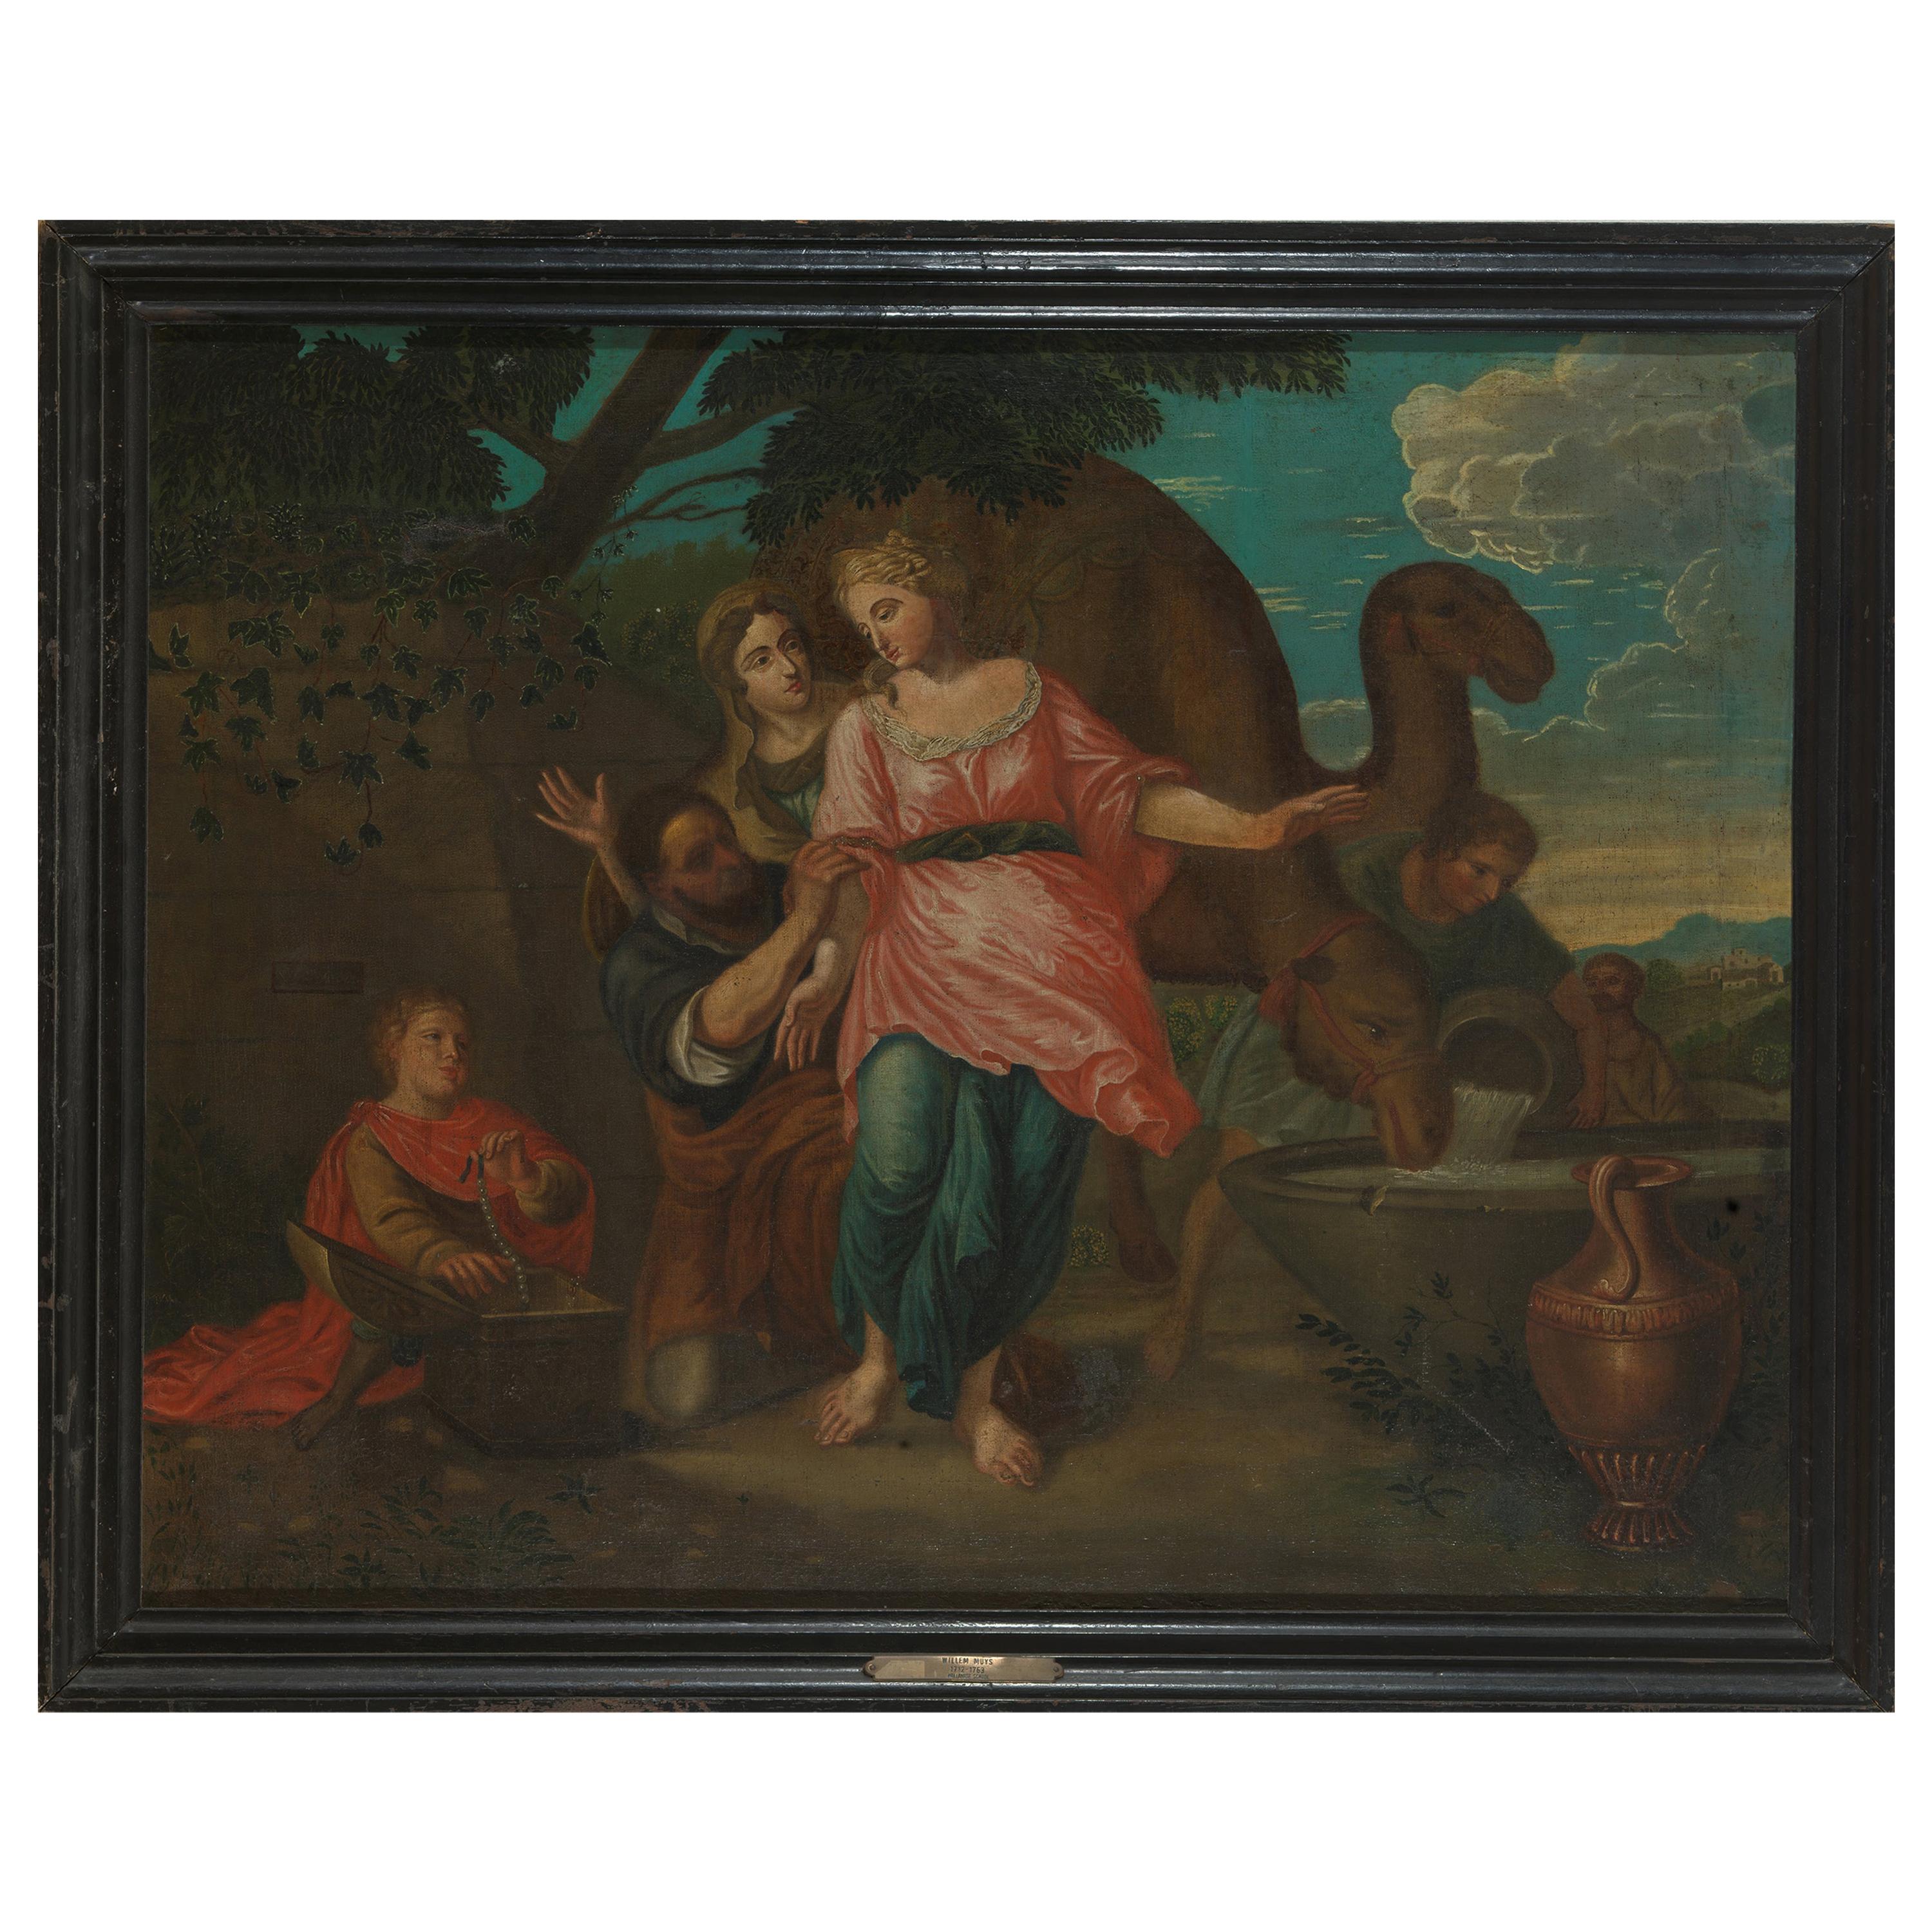 18th Century, Willem Muys, Rebekka and Eliëzer at the Water Source, Oil on